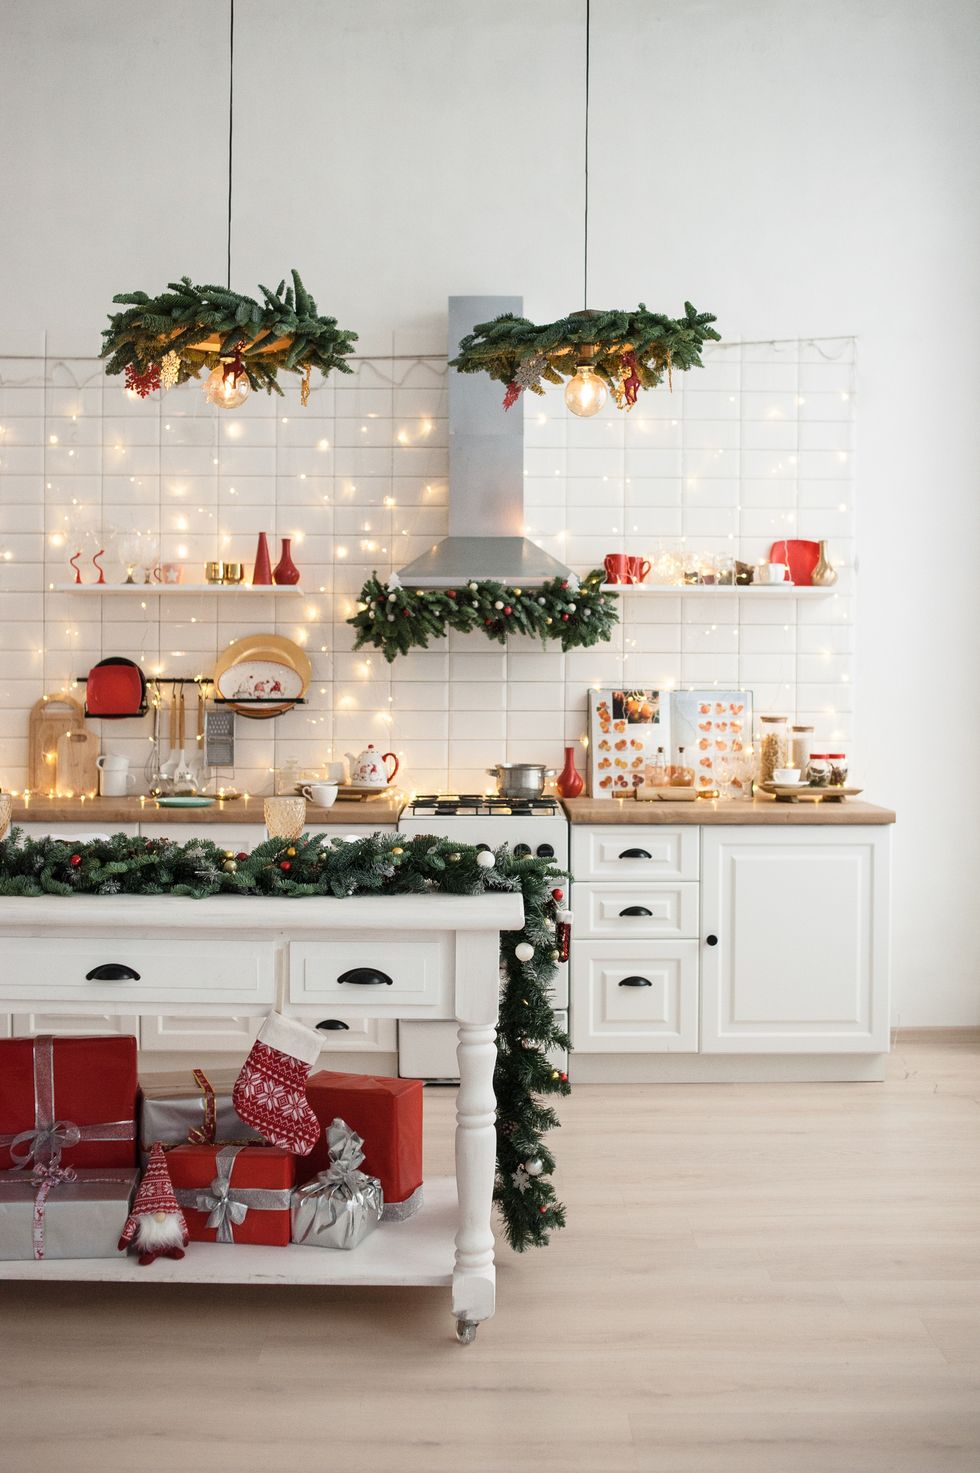 How to Decorate a Kitchen Christmas Tree